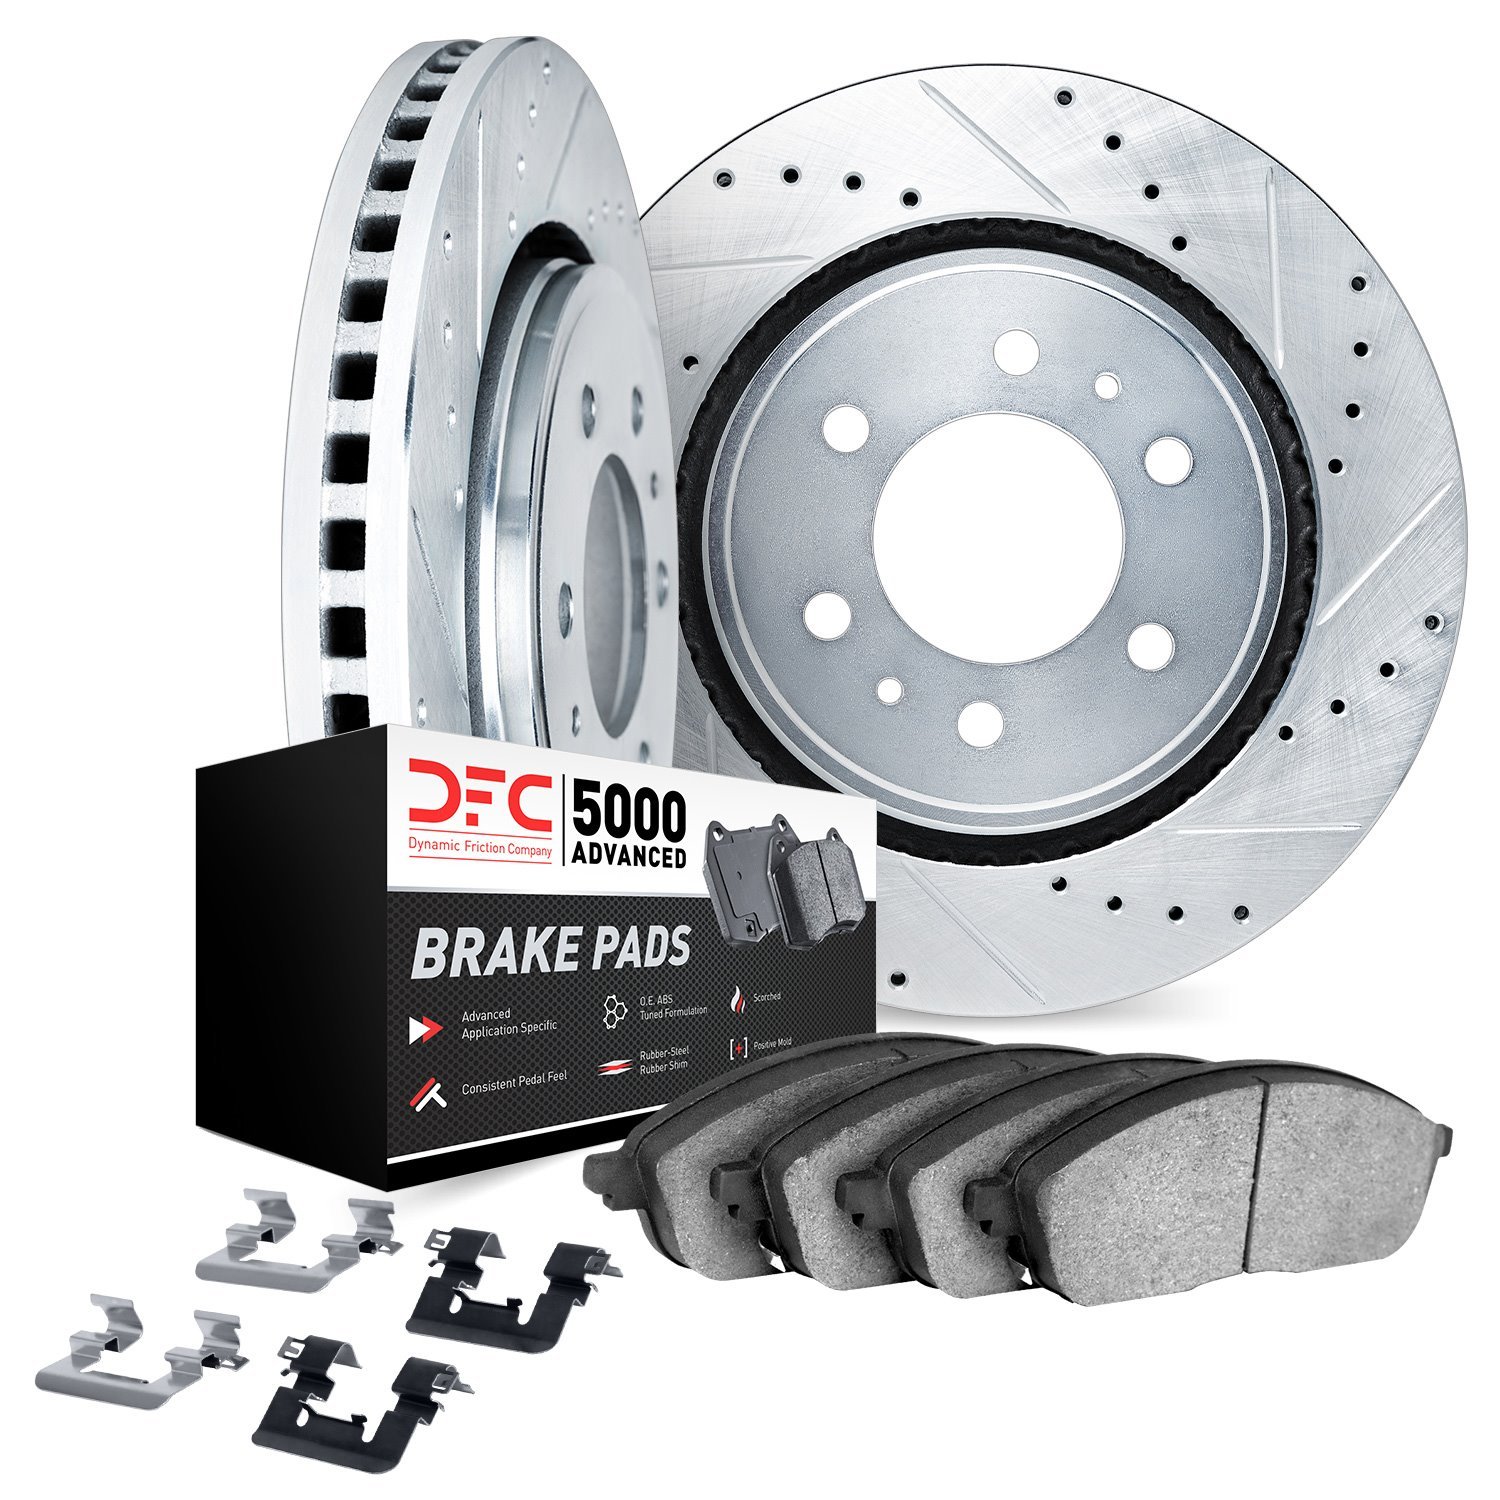 7512-54206 Drilled/Slotted Brake Rotors w/5000 Advanced Brake Pads Kit & Hardware [Silver], Fits Select Ford/Lincoln/Mercury/Maz